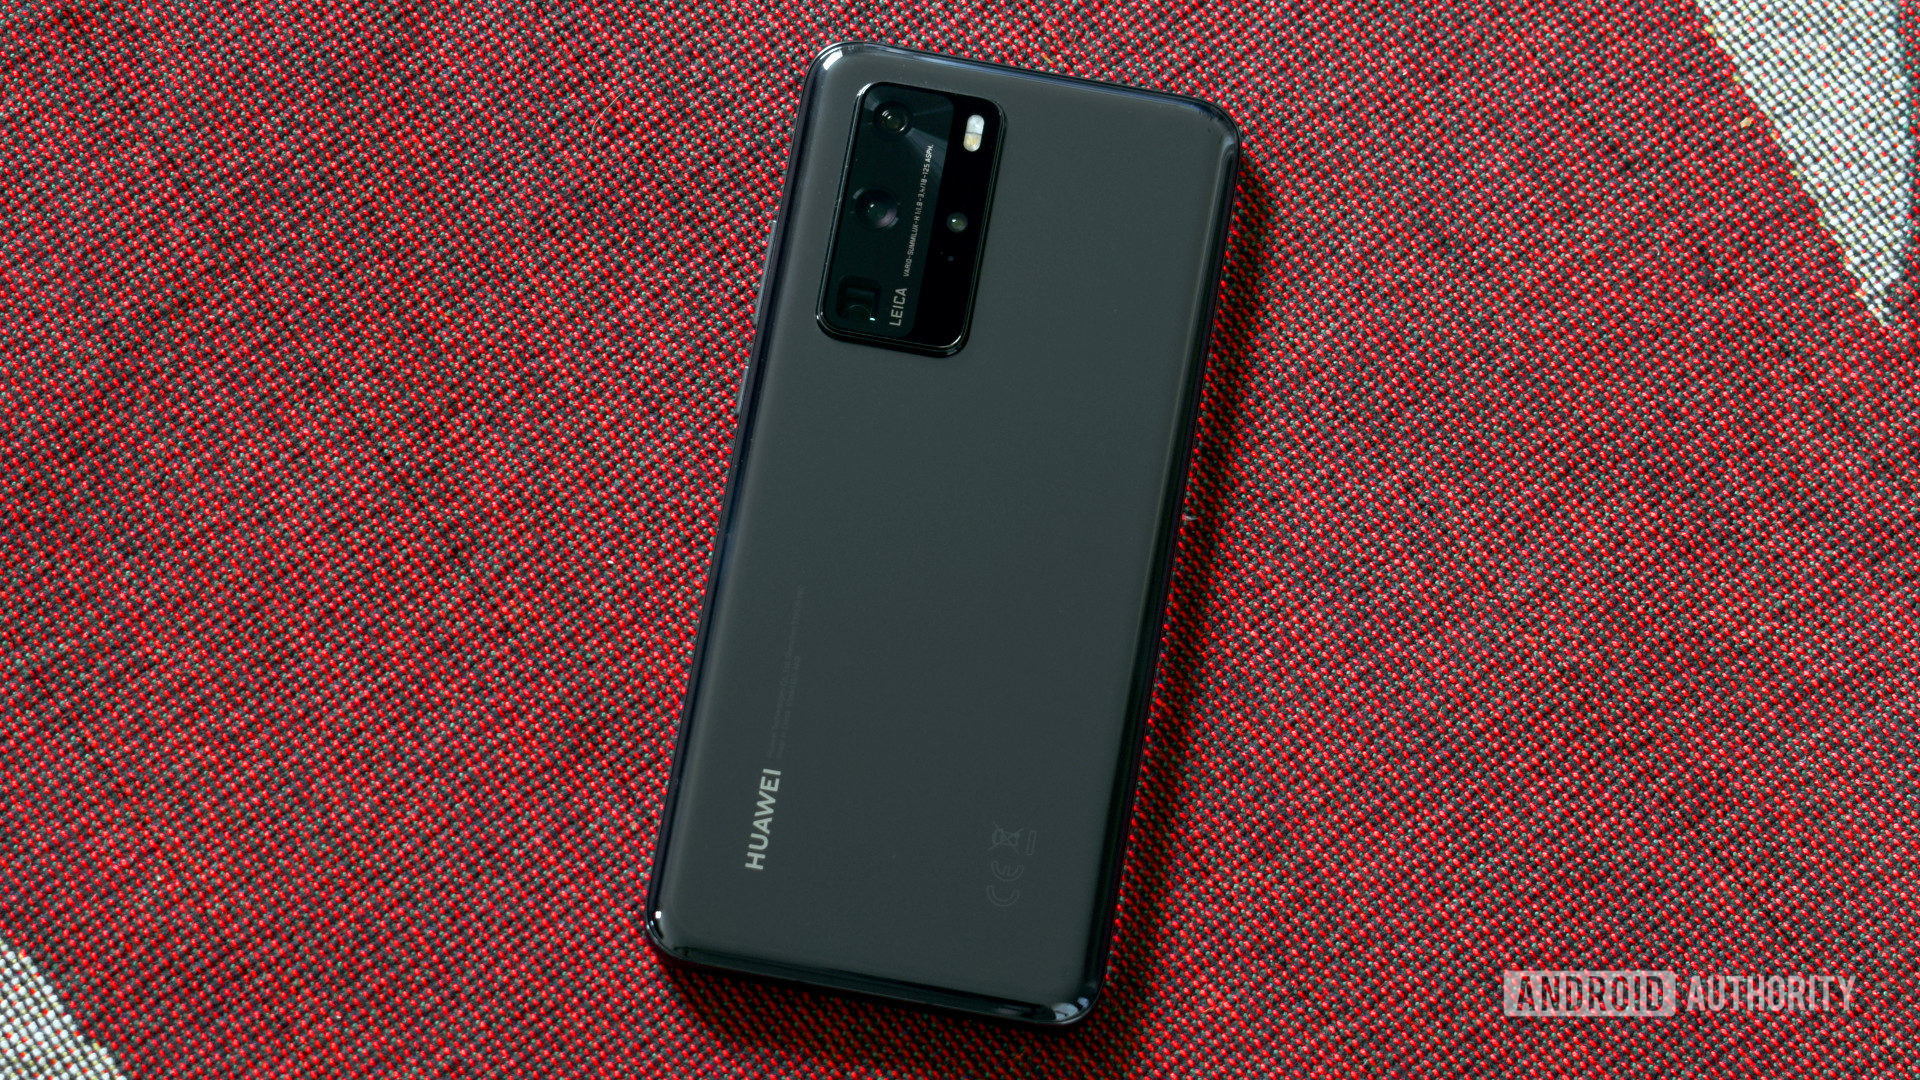 https://www.androidauthority.com/wp-content/uploads/2020/10/Huawei-P40-P40-revisited-back-e1603973684466.jpg